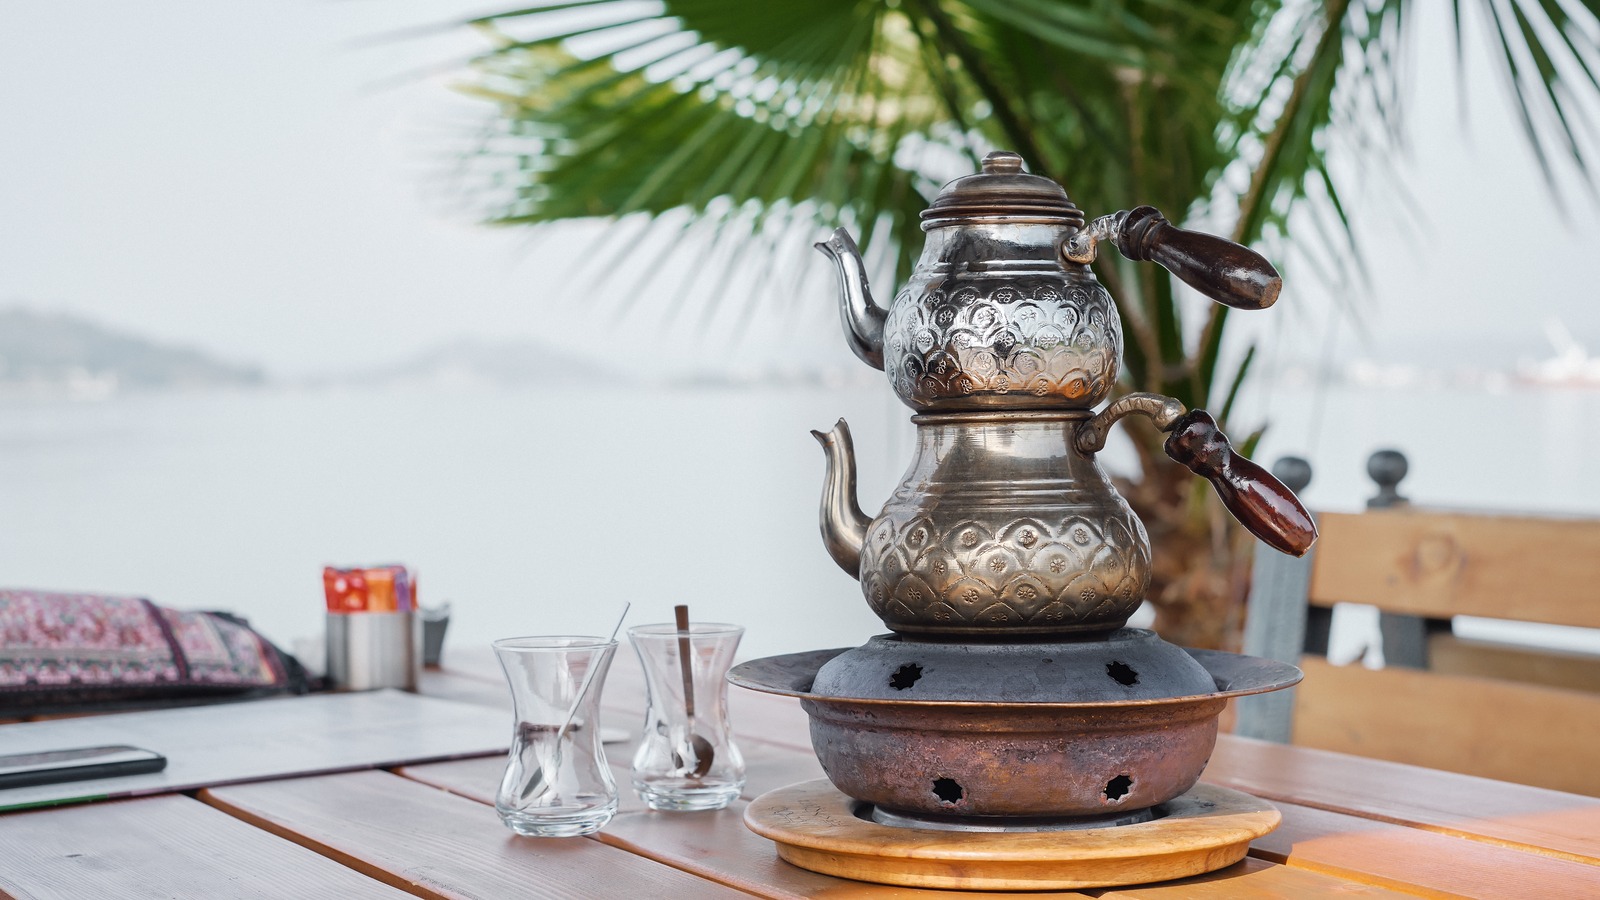 Why The Turkish Double Kettle Is A Game-Changer For Tea Lovers